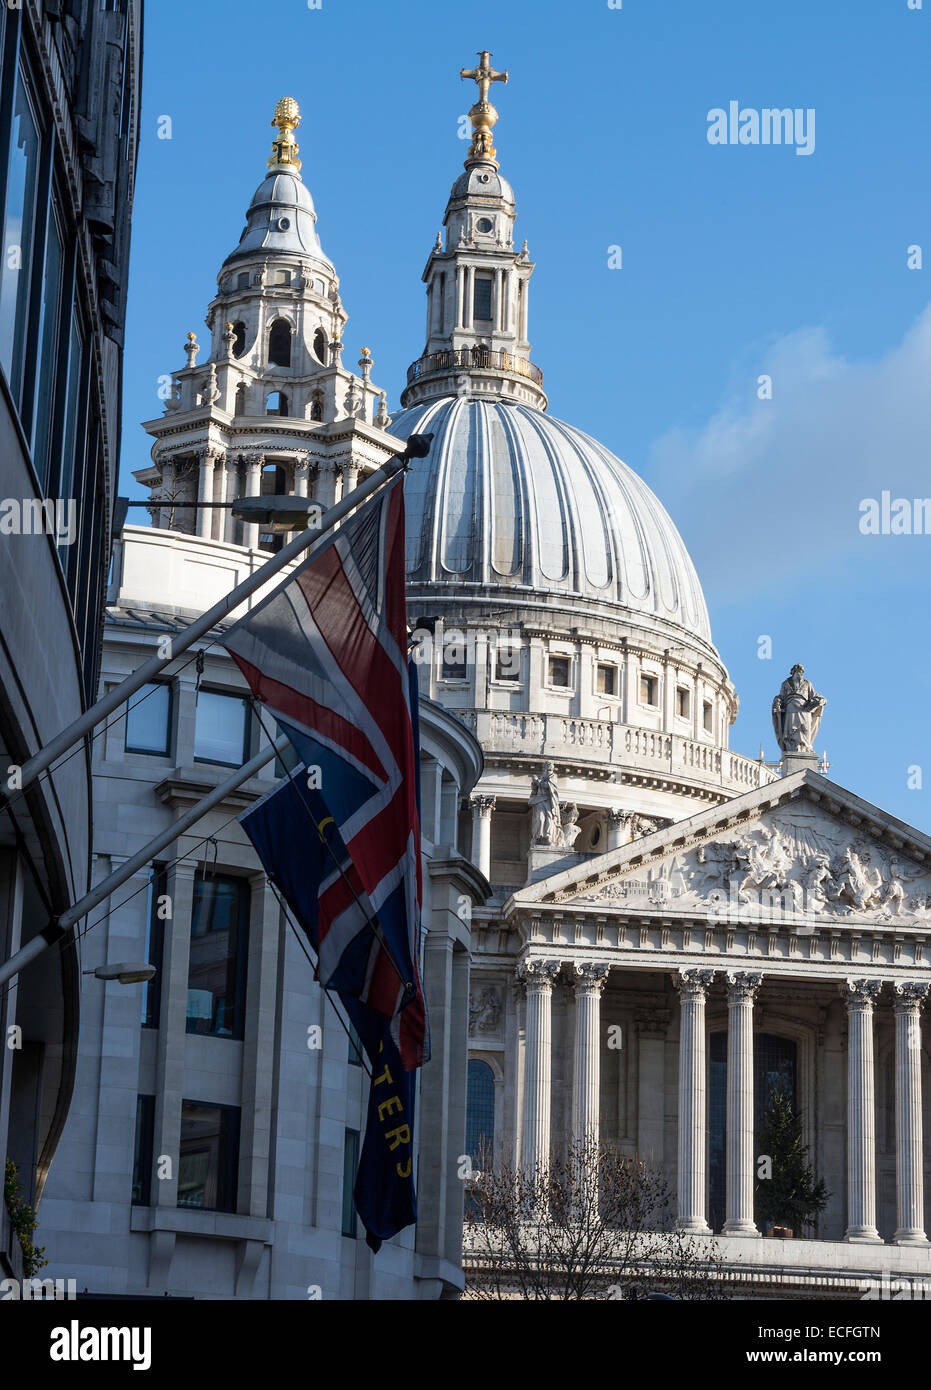 The Famous Dome of St Paul's Cathedral Ludgate Hill City of London England United Kingdom UK Stock Photo